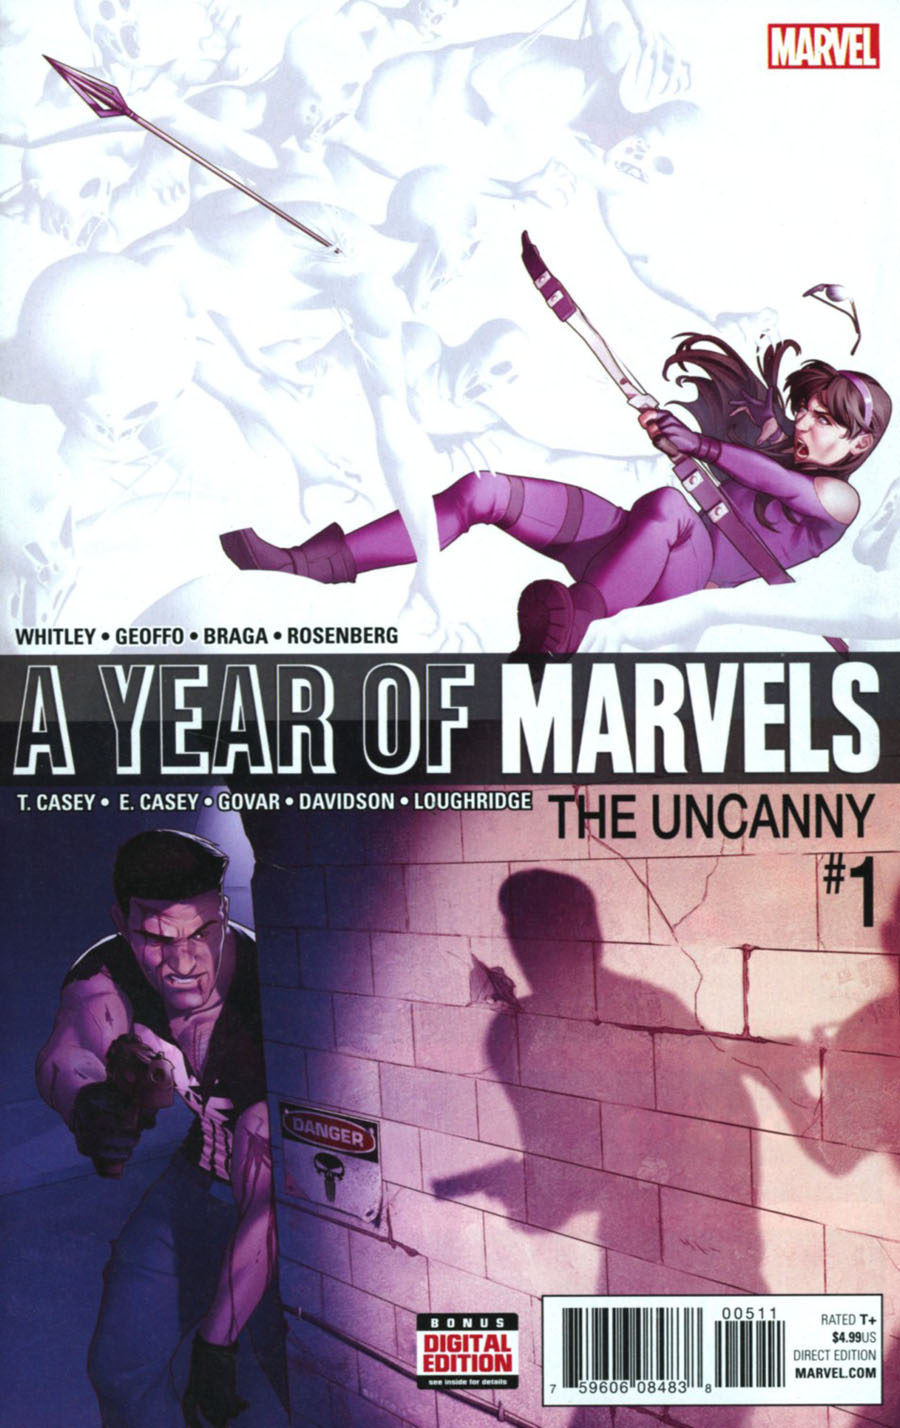 A Year Of Marvels Uncanny #1